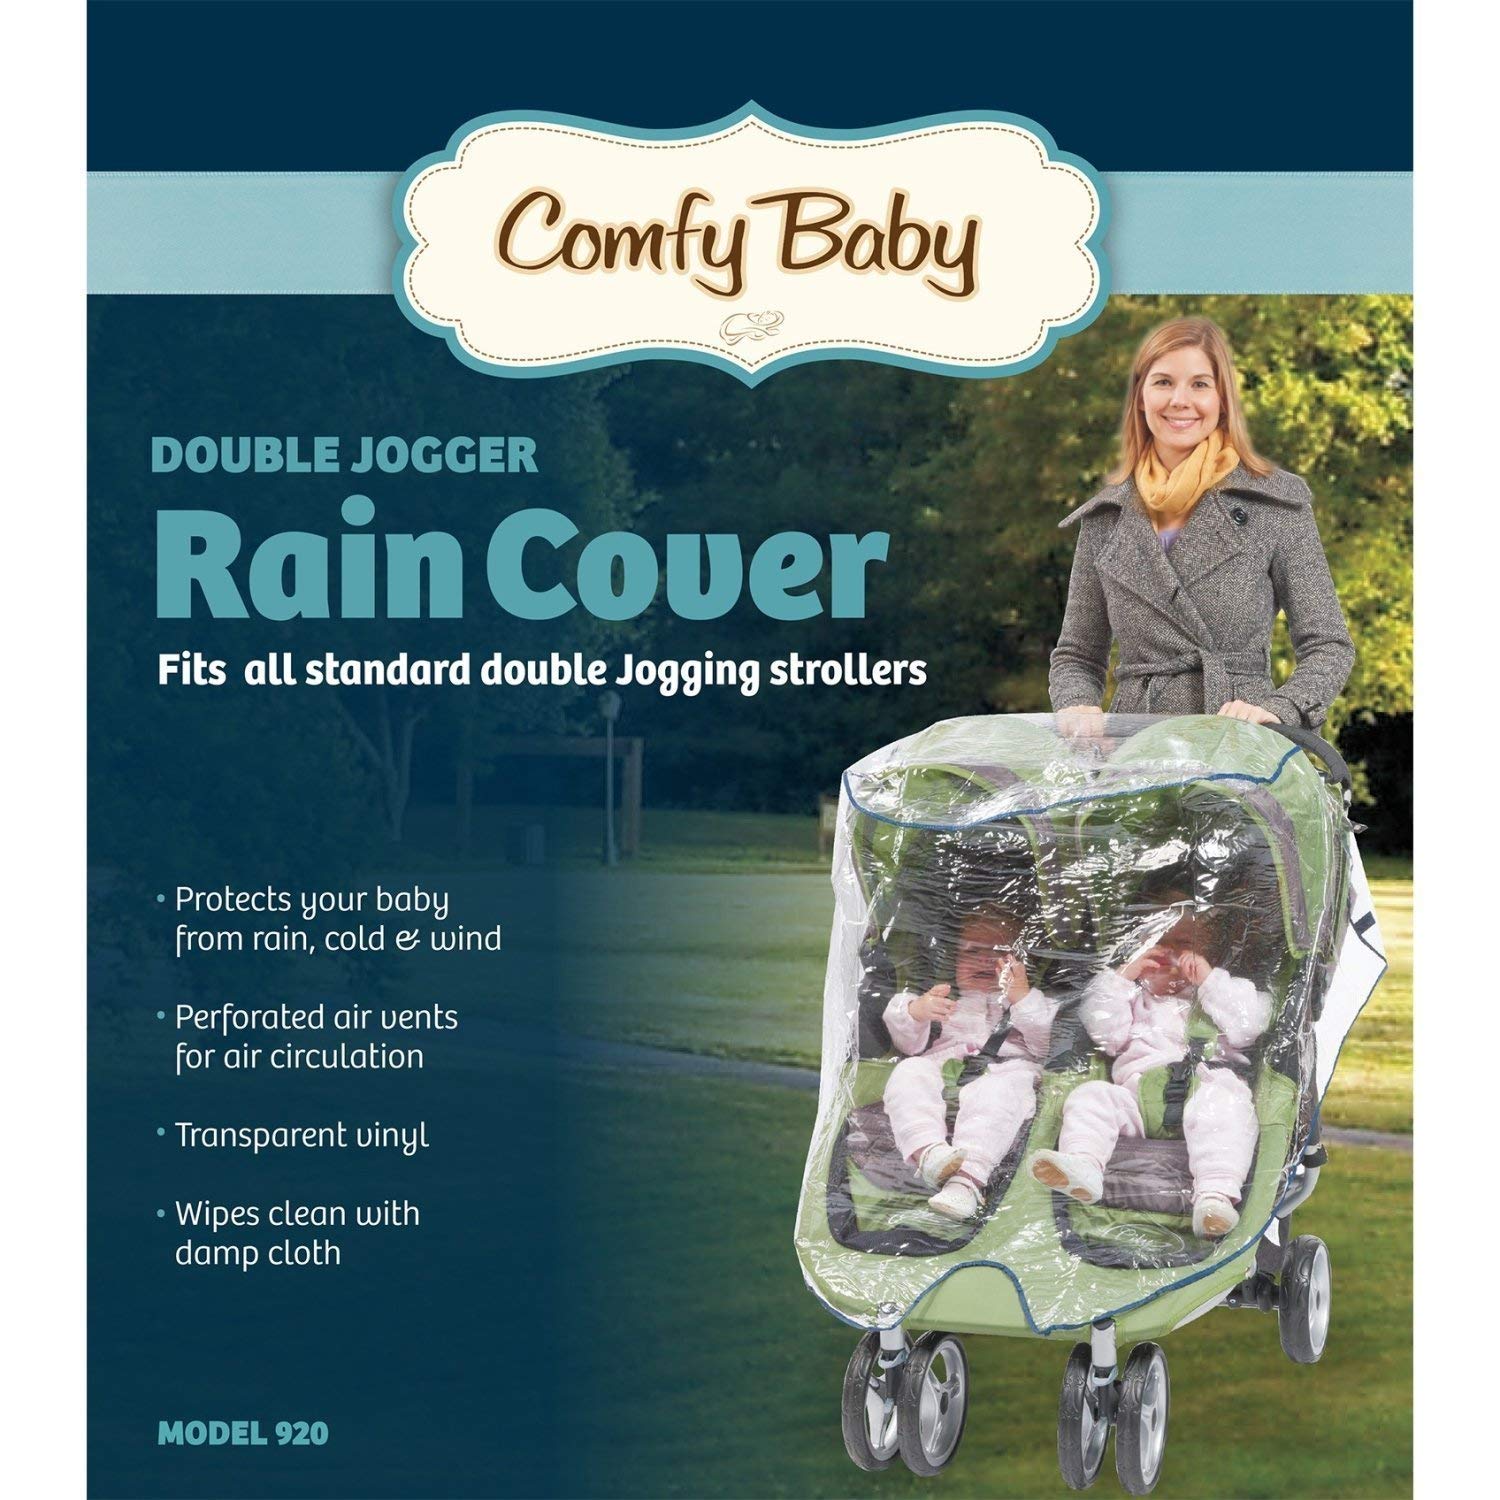 Comfy Baby Universal Double Jogging Stroller Raincover